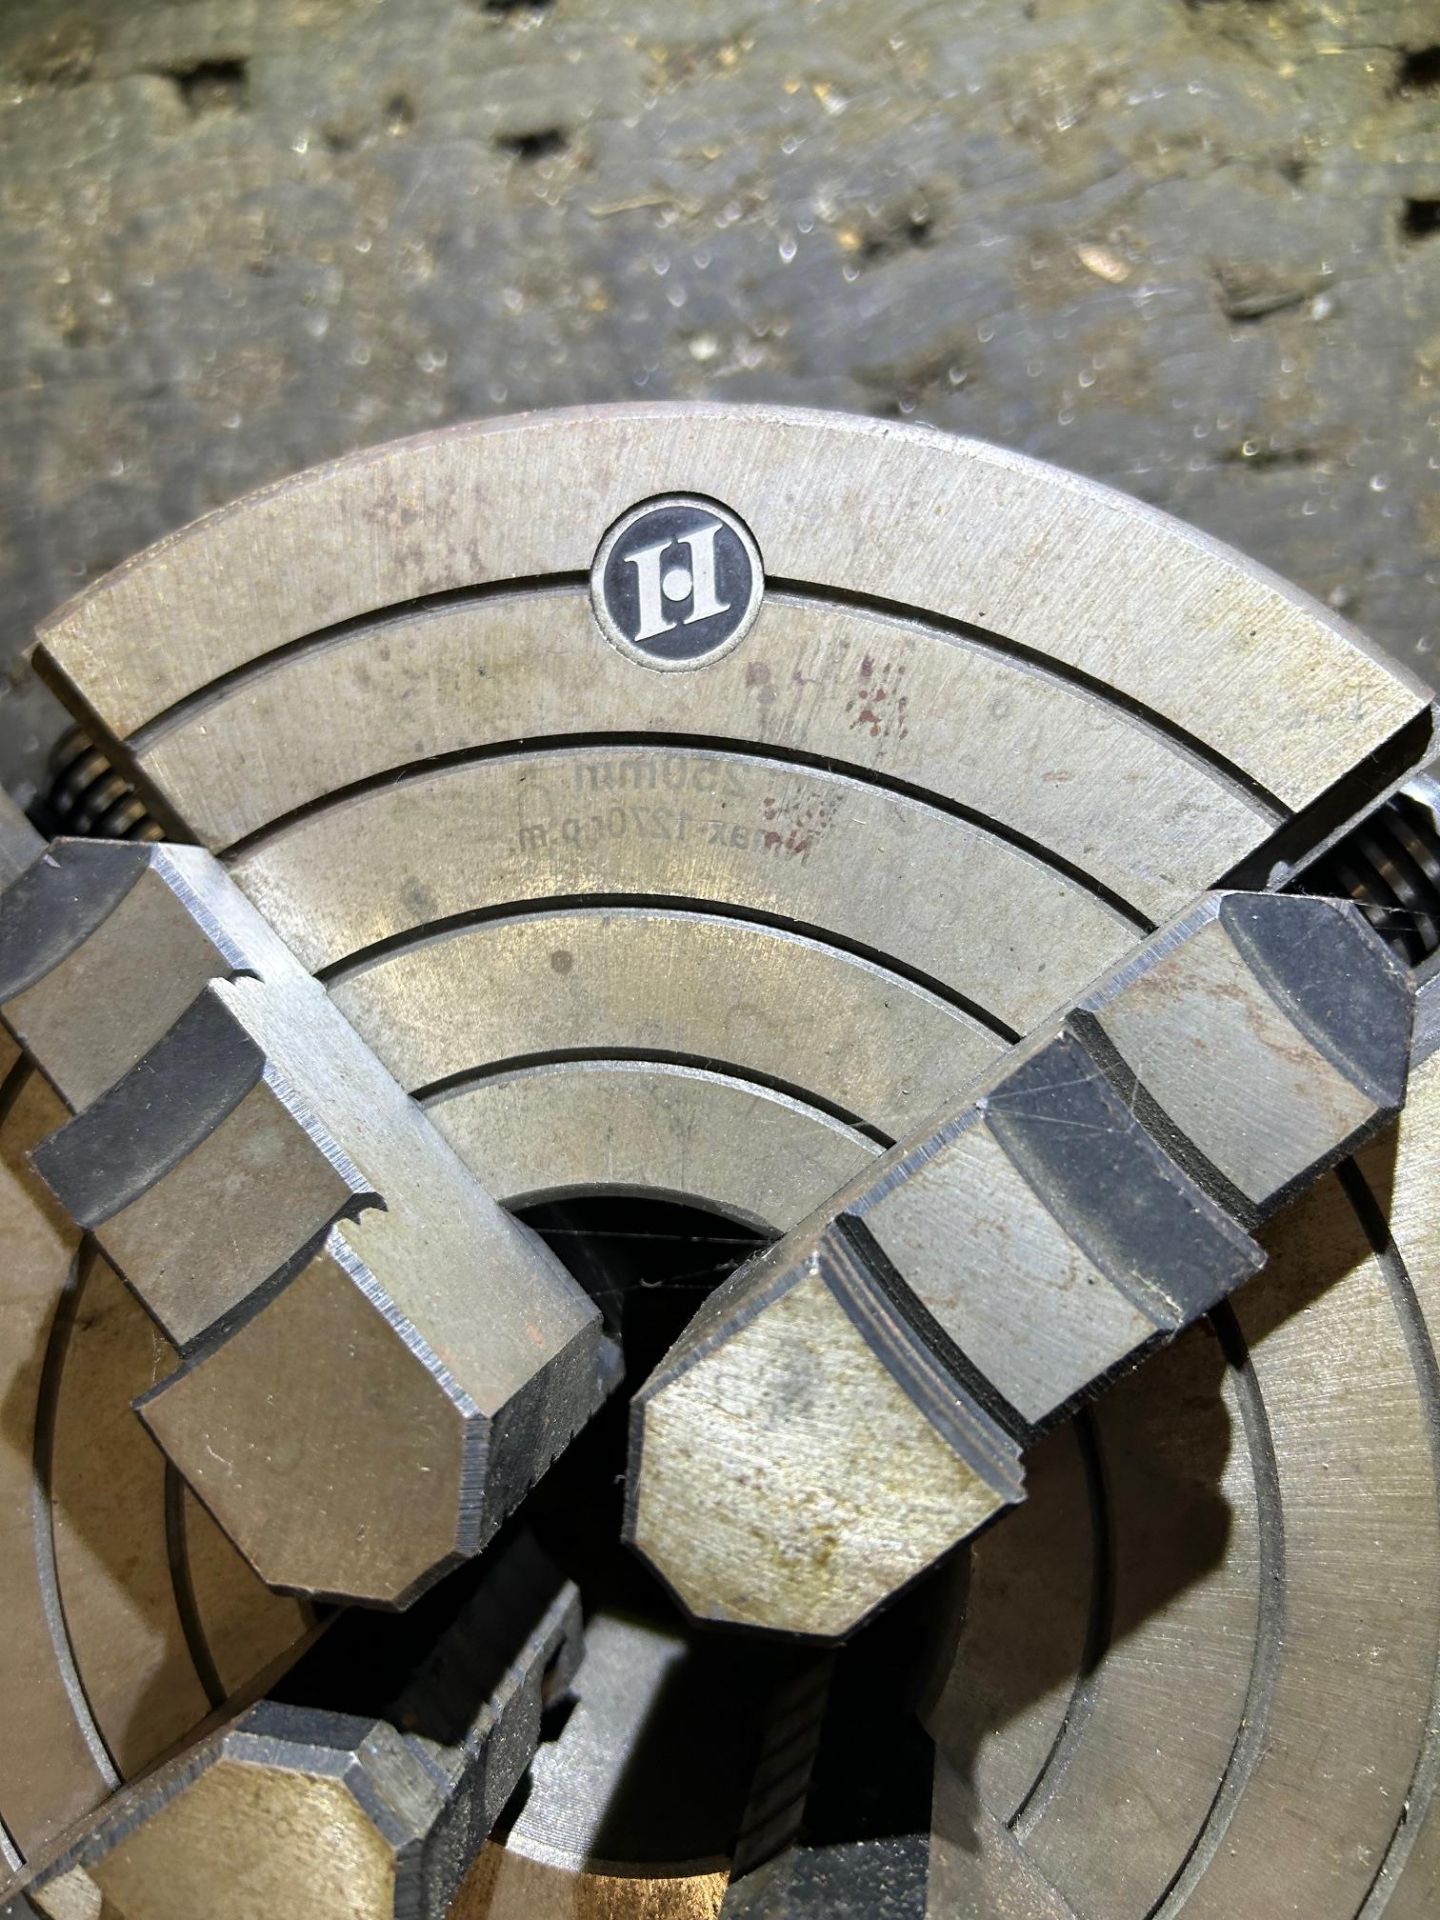 4-Jaw Chuck for Millport Lathe - Image 5 of 6